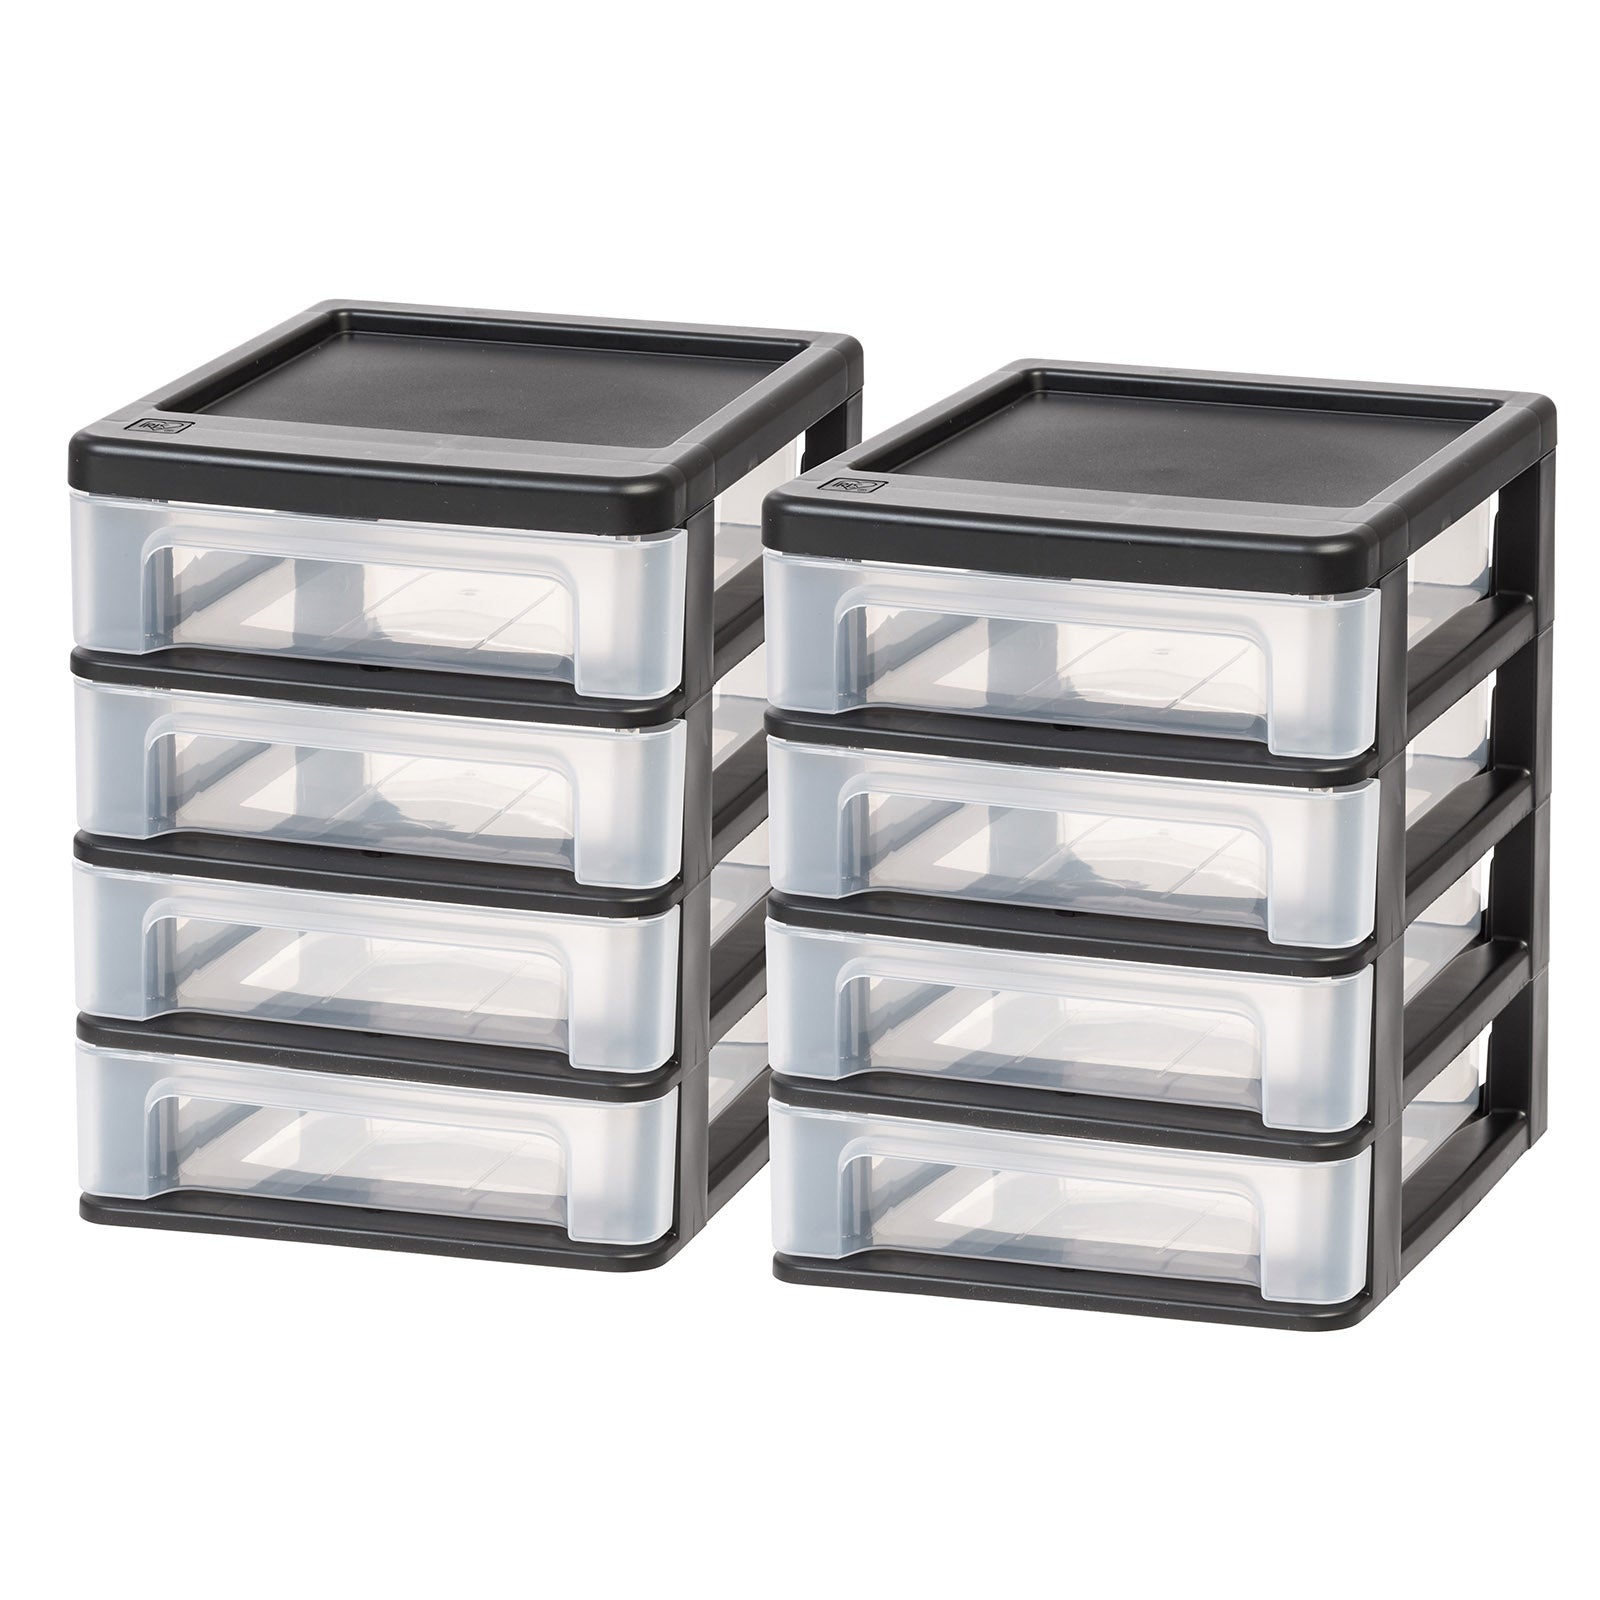 Iris Usa 10pack 5qt Stackable Plastic Storage Bins With Lids And